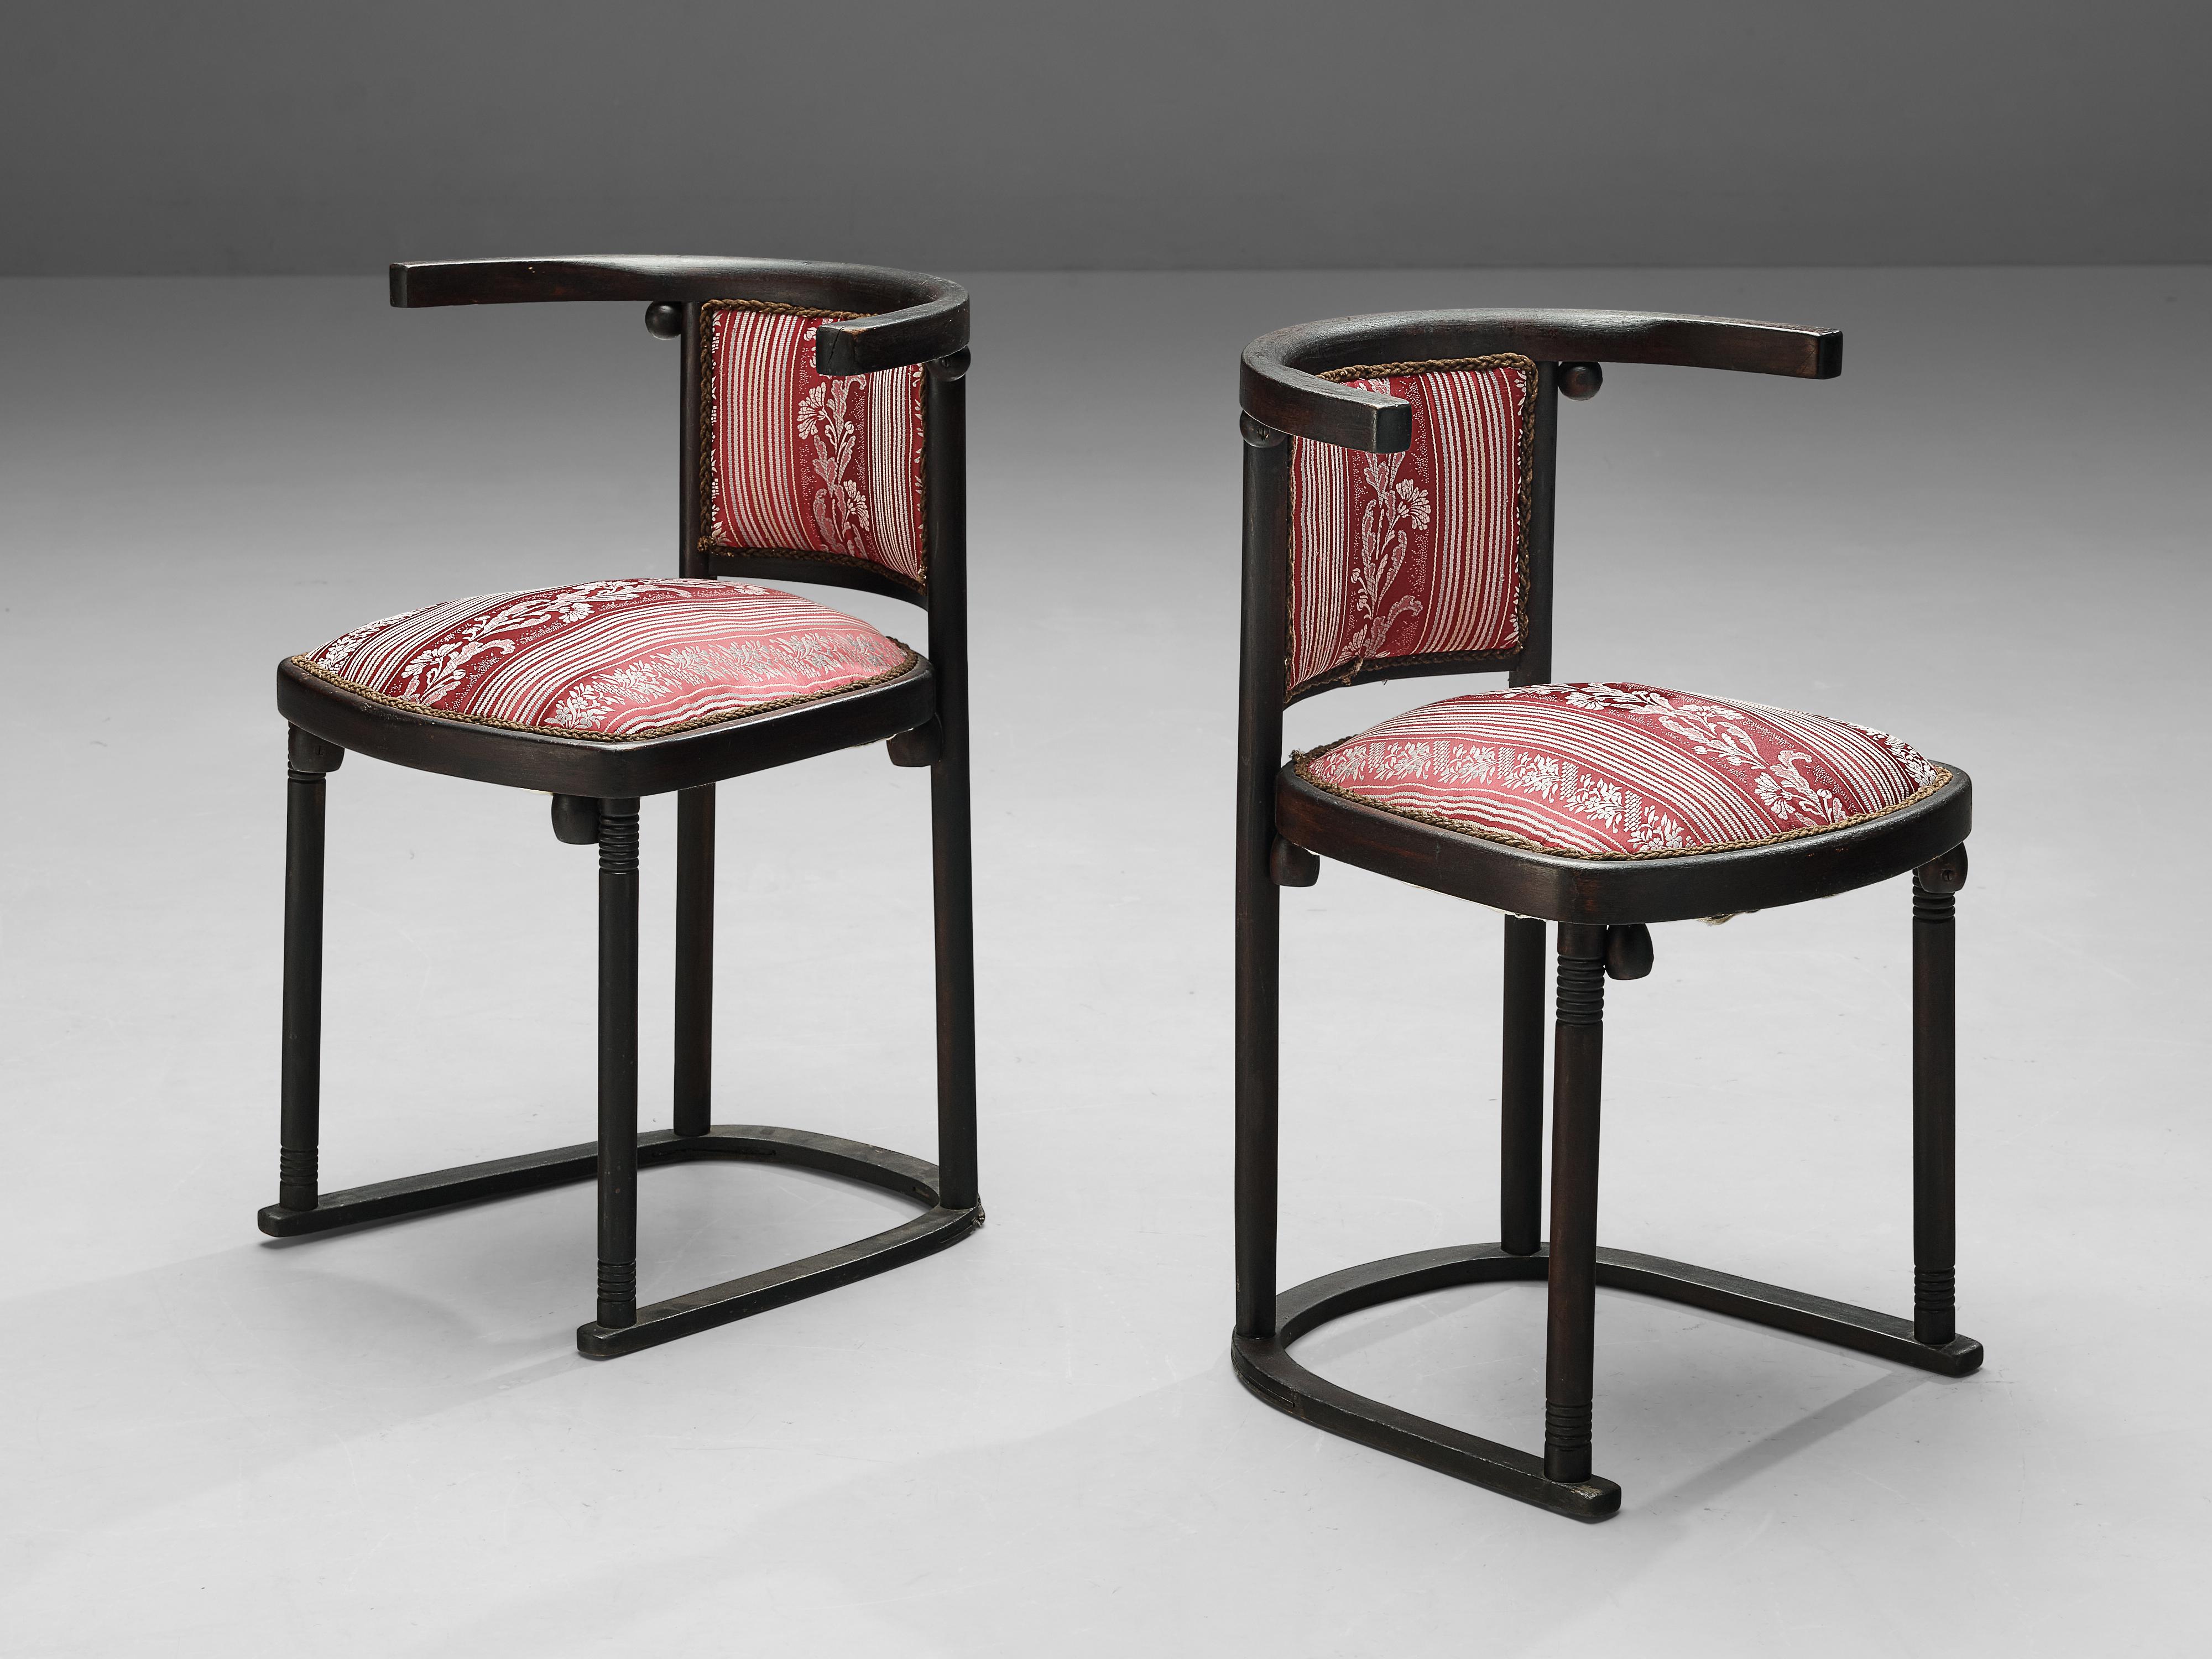 Josef Hoffmann, ‘Fledermaus’ dining chairs, beech, fabric, Austria, design 1907

This pair of dining chairs is specially designed by Josef Hoffmann (1870-1956) for the Cabaret Fledermaus in Vienna in 1907. This building was understood as a place